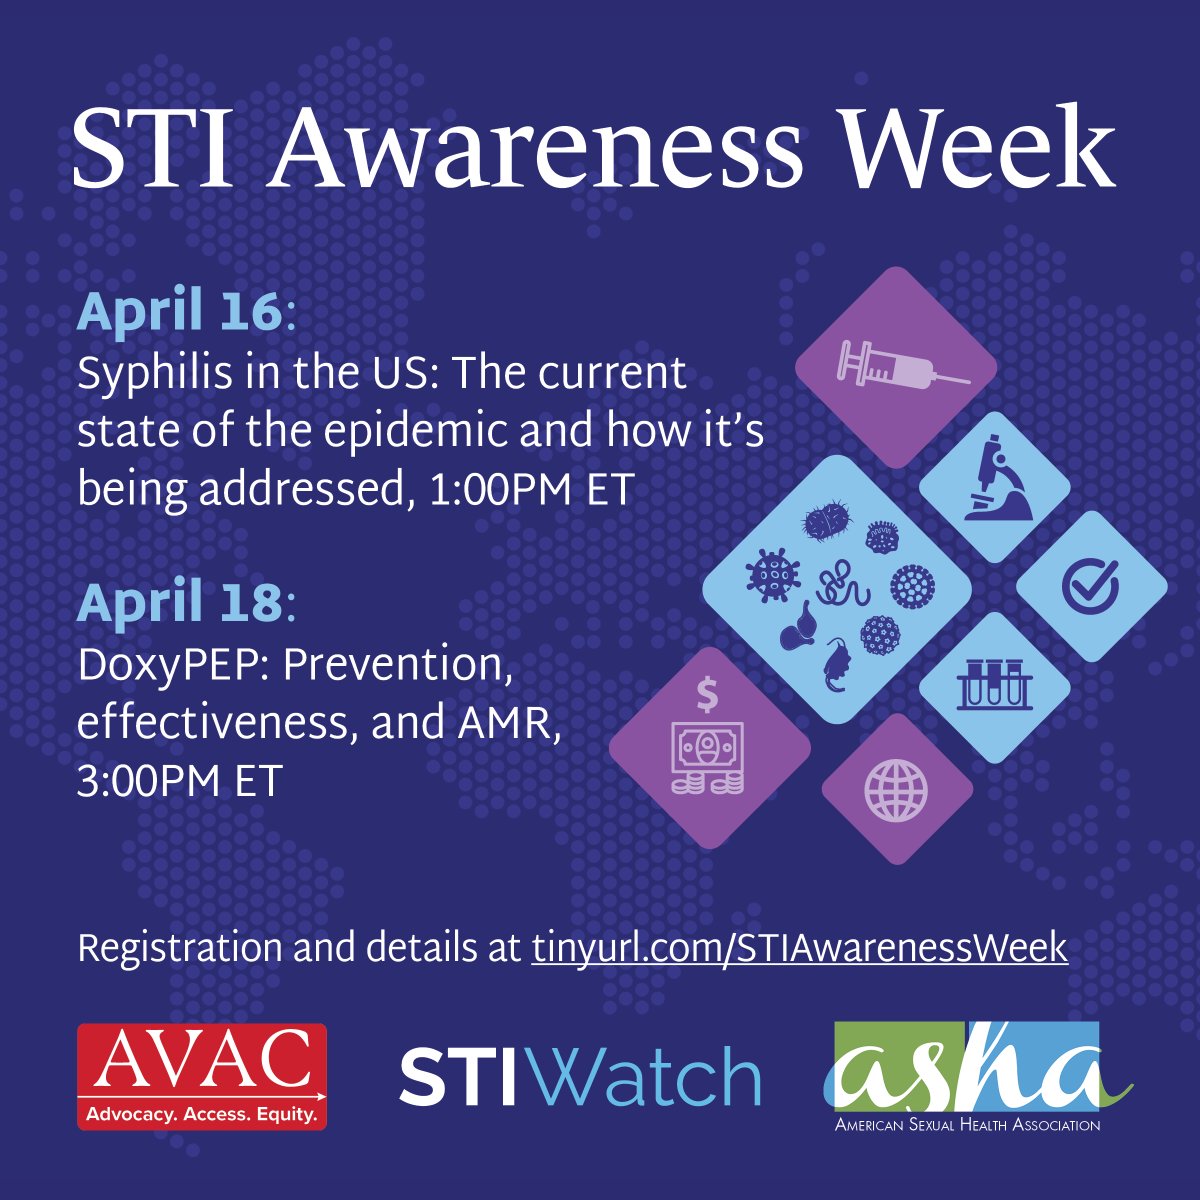 Happy #STIAwarenessWeek! Join AVAC and @InfoASHA for two brand-new webinars this week (tomorrow, April 16 and Thursday, April 18) to discuss the current #syphillis epidemic in the US and #DoxyPEP effectiveness and AMR. Learn more and register here ✨ avac.org/event/sti-awar…